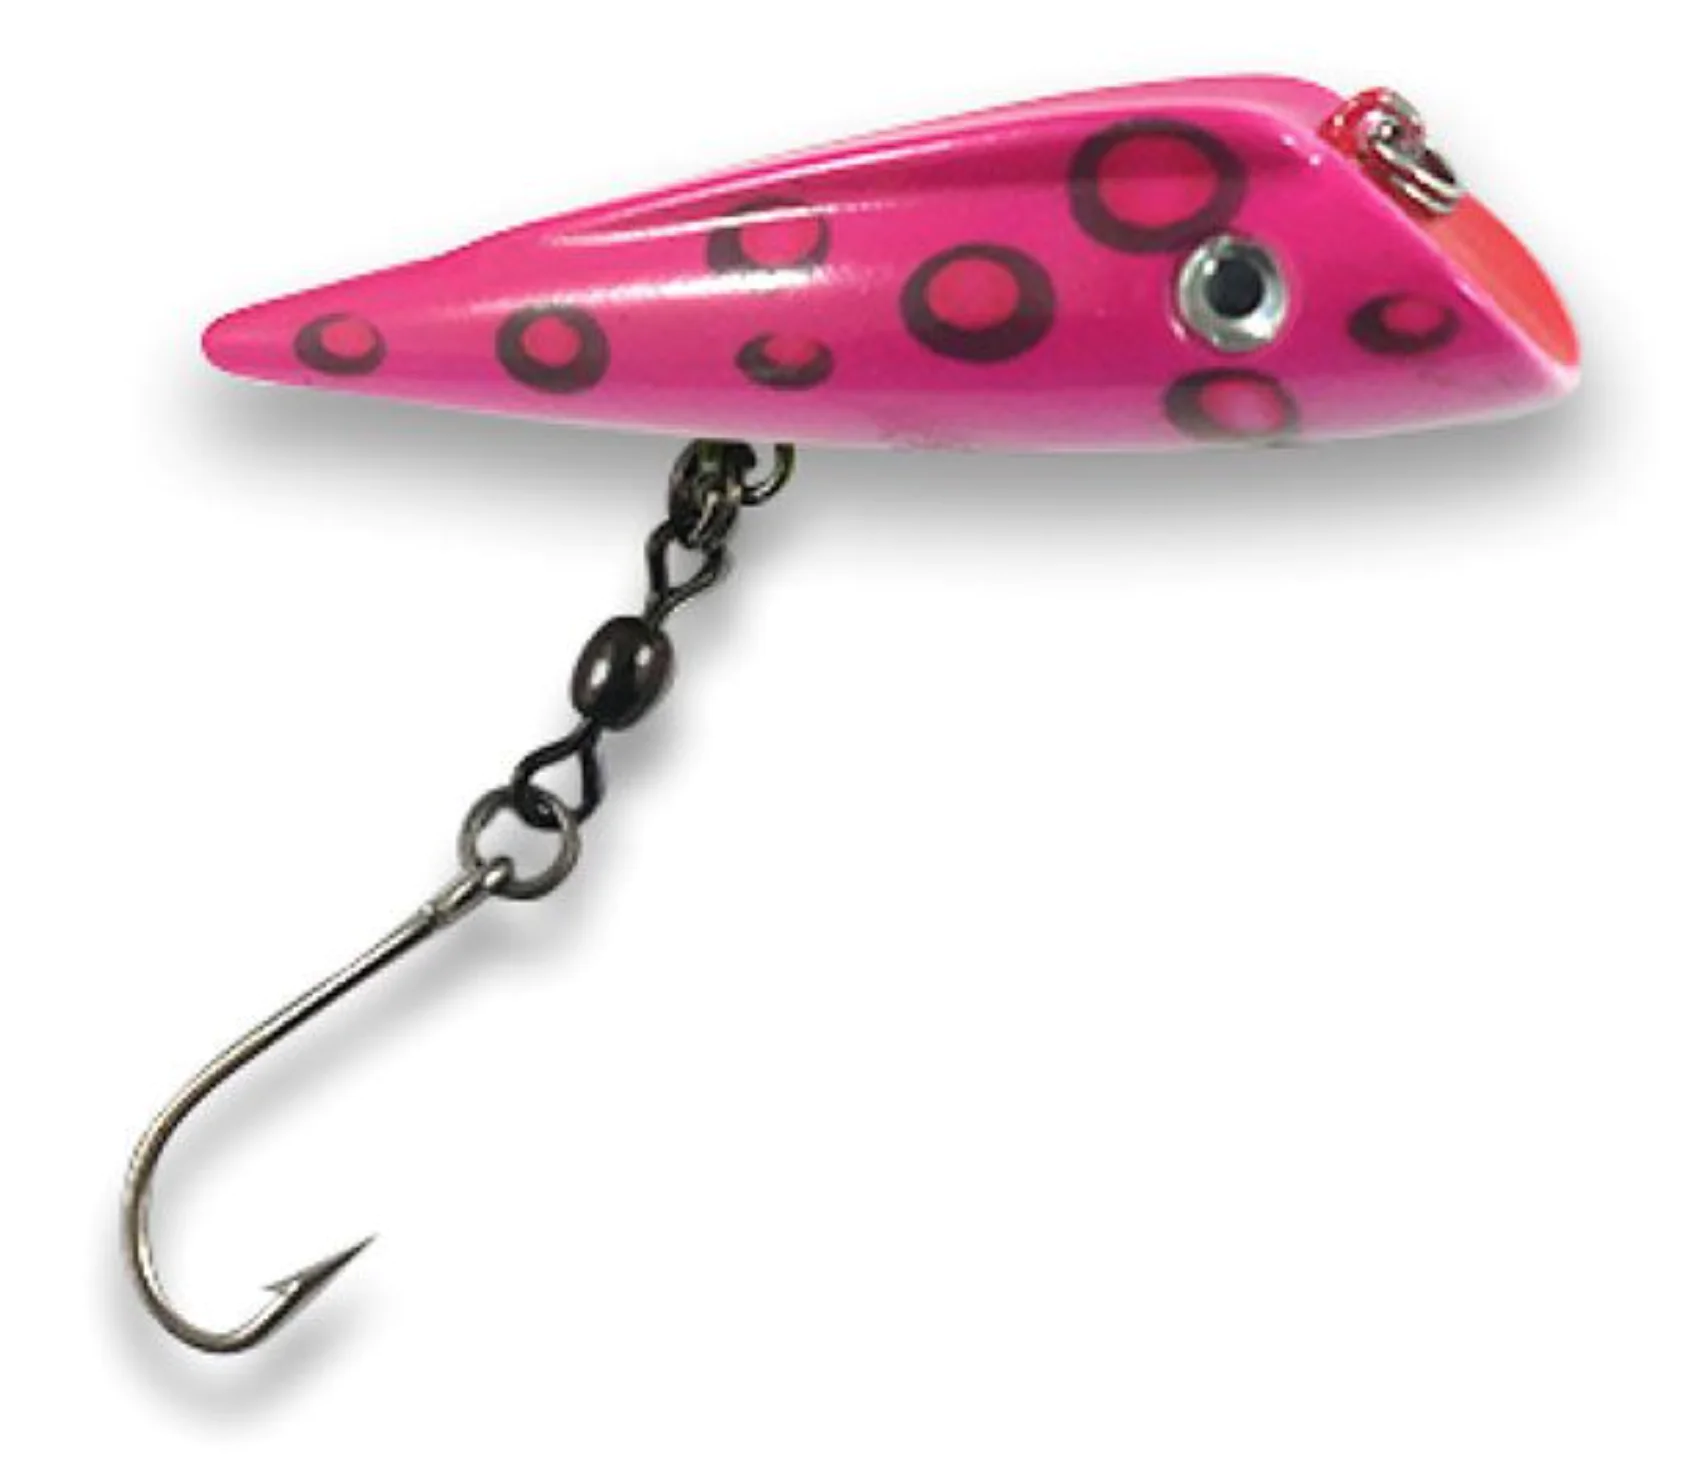 LUCKY PLUG SMALL pink trout